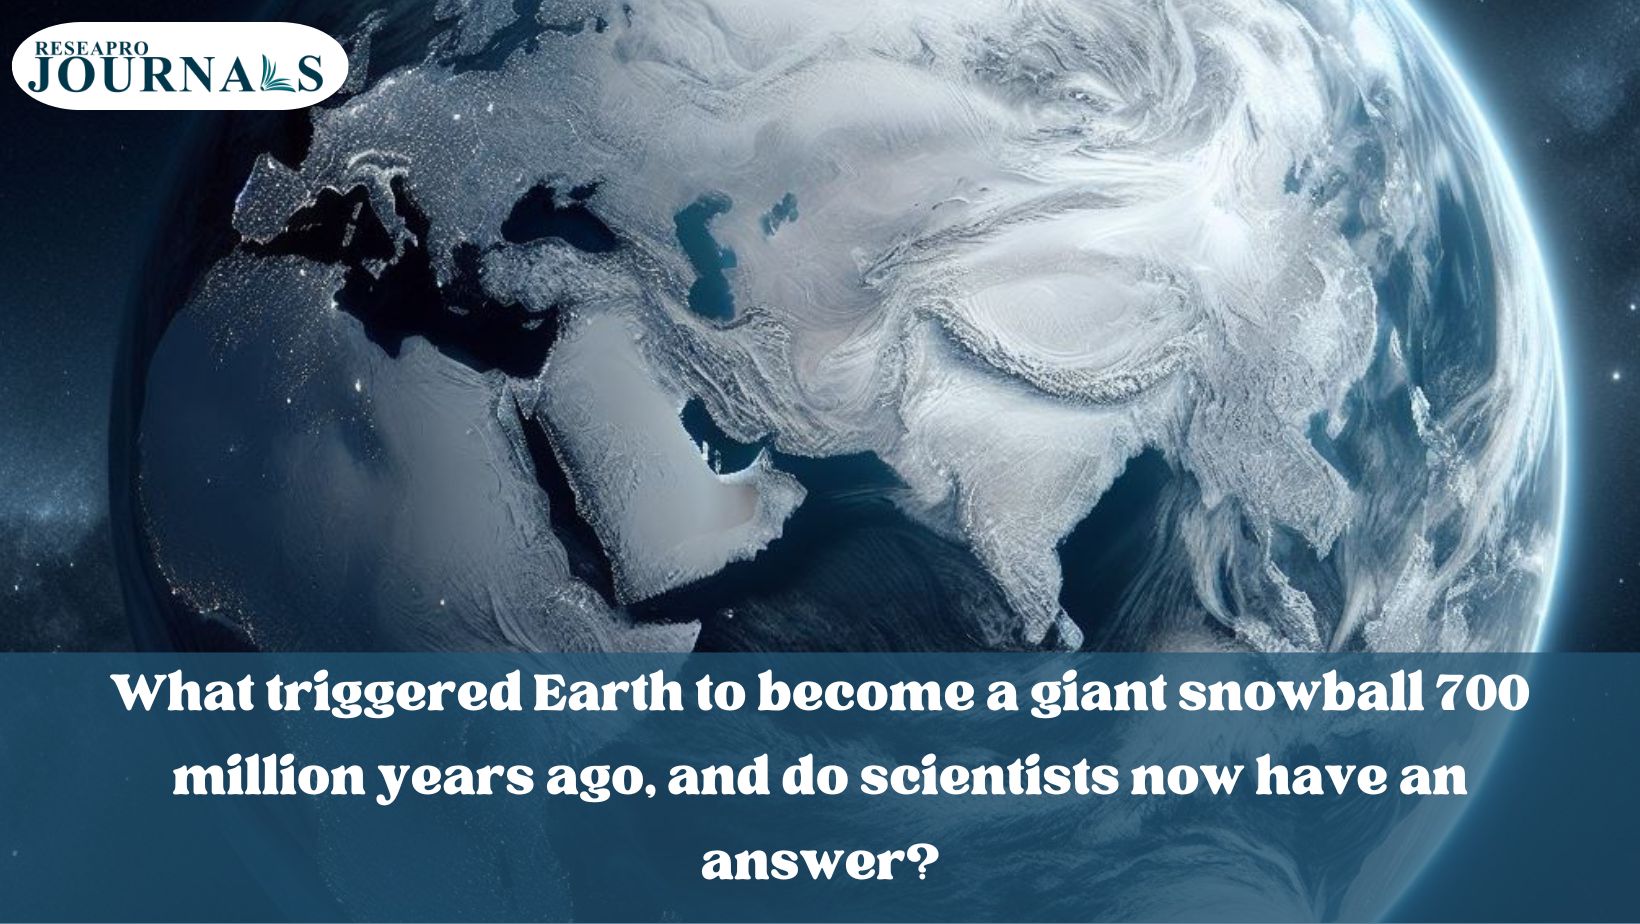 Snowball Earth: Volcanic carbon emissions decline, sparking 57-million-year ice age.